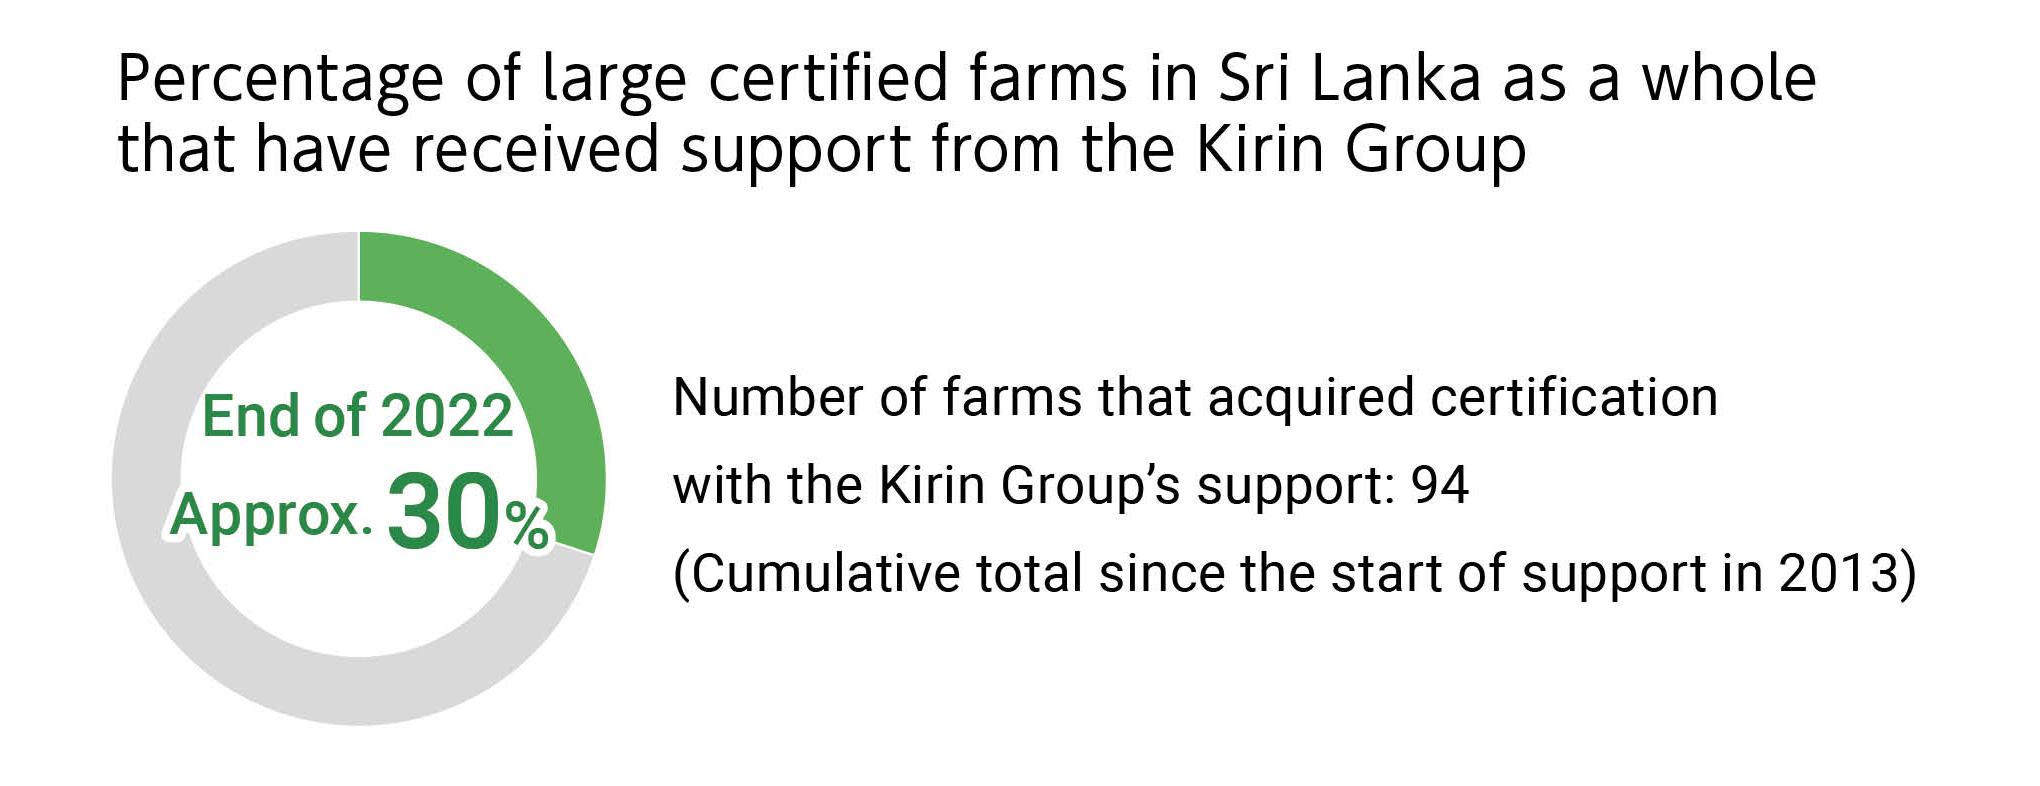 Percentage of large certified farms that have received support from the Kirin Group